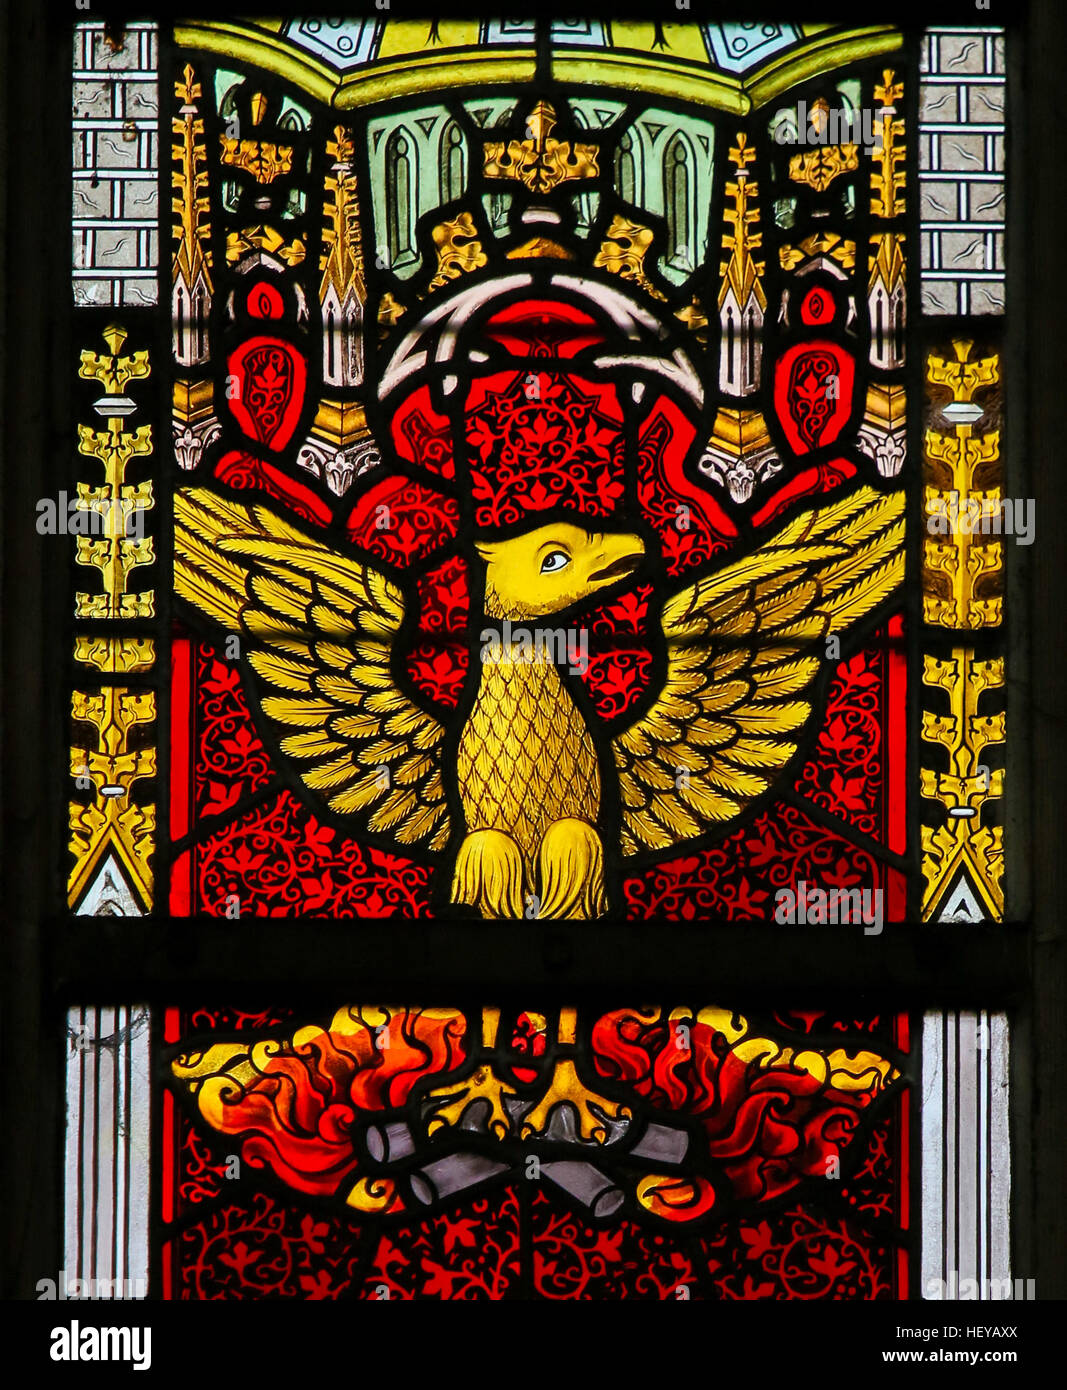 Stained Glass window depicting a Phoenix rising from the Ashes, in the Cathedral of Saint Bavo in Ghent, Flanders, Belgium. Stock Photo